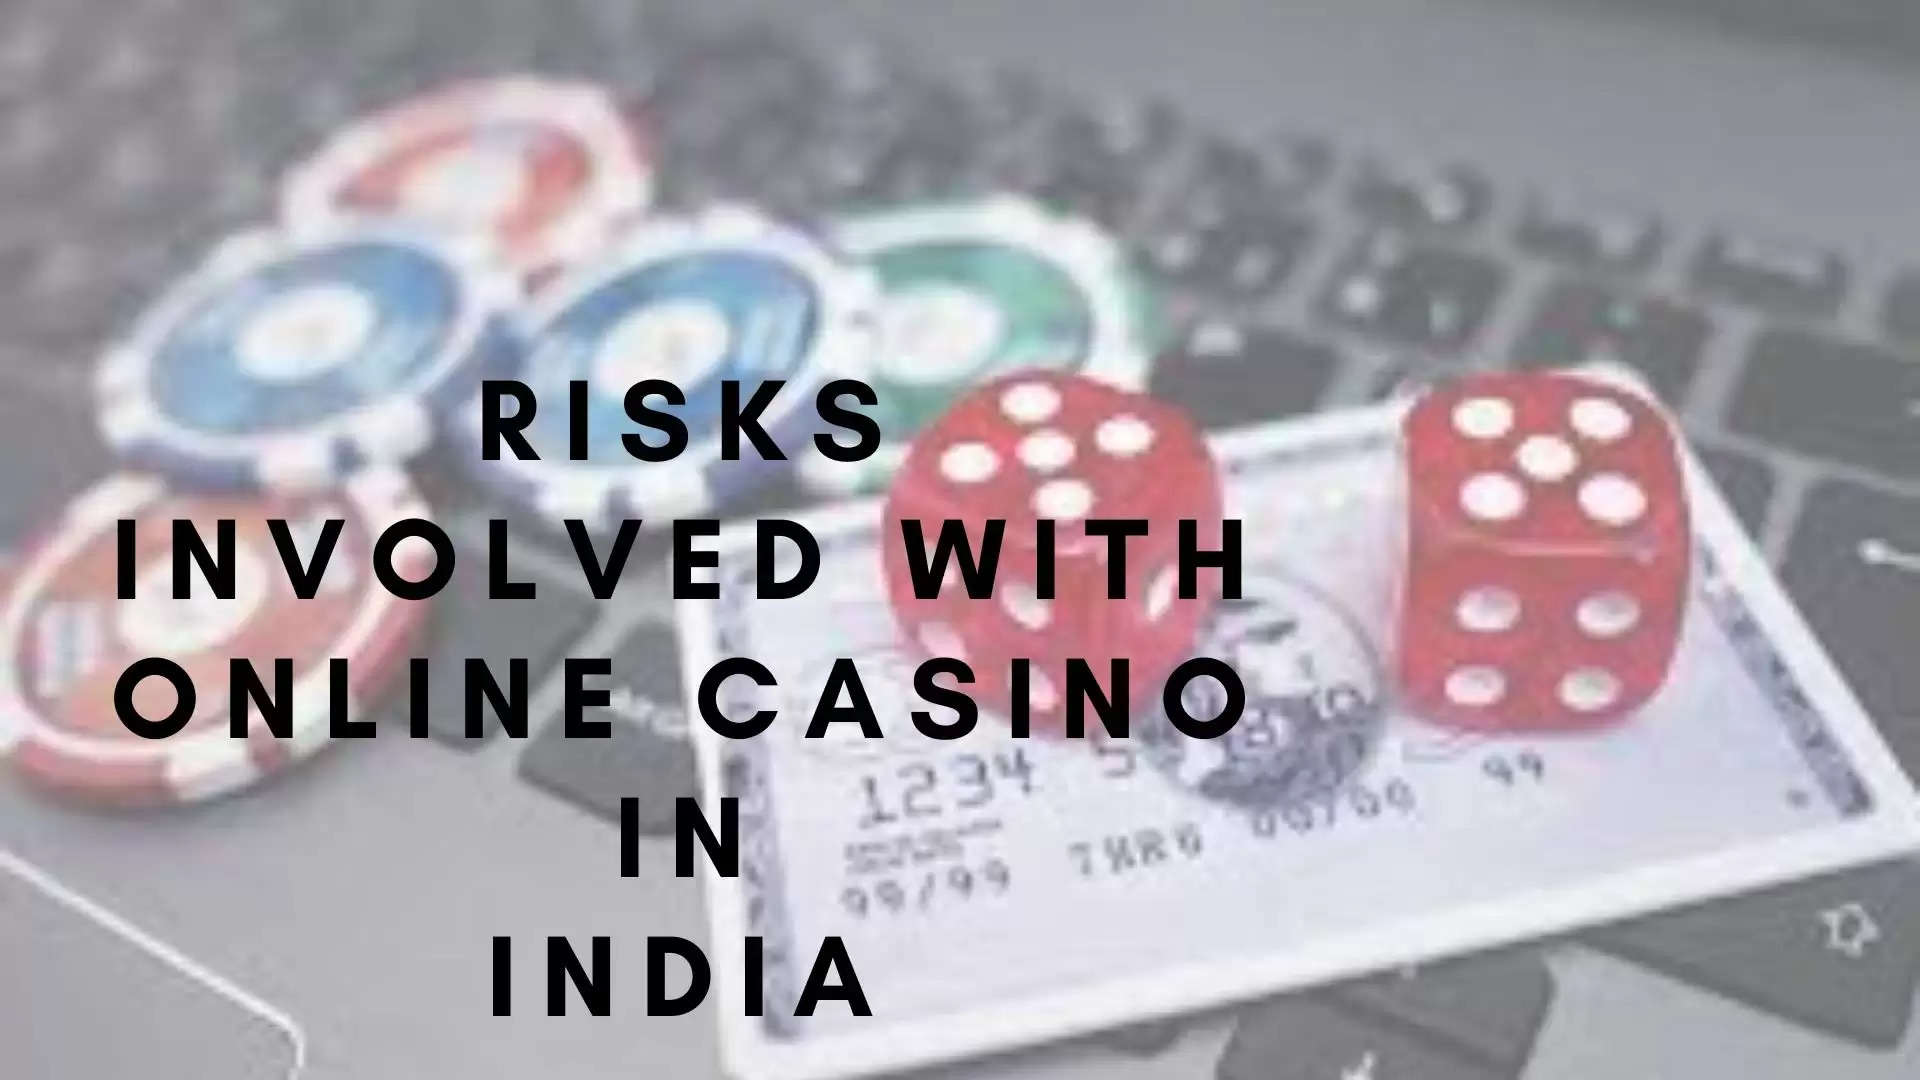 What are the Risks involved with Online Casinos in India